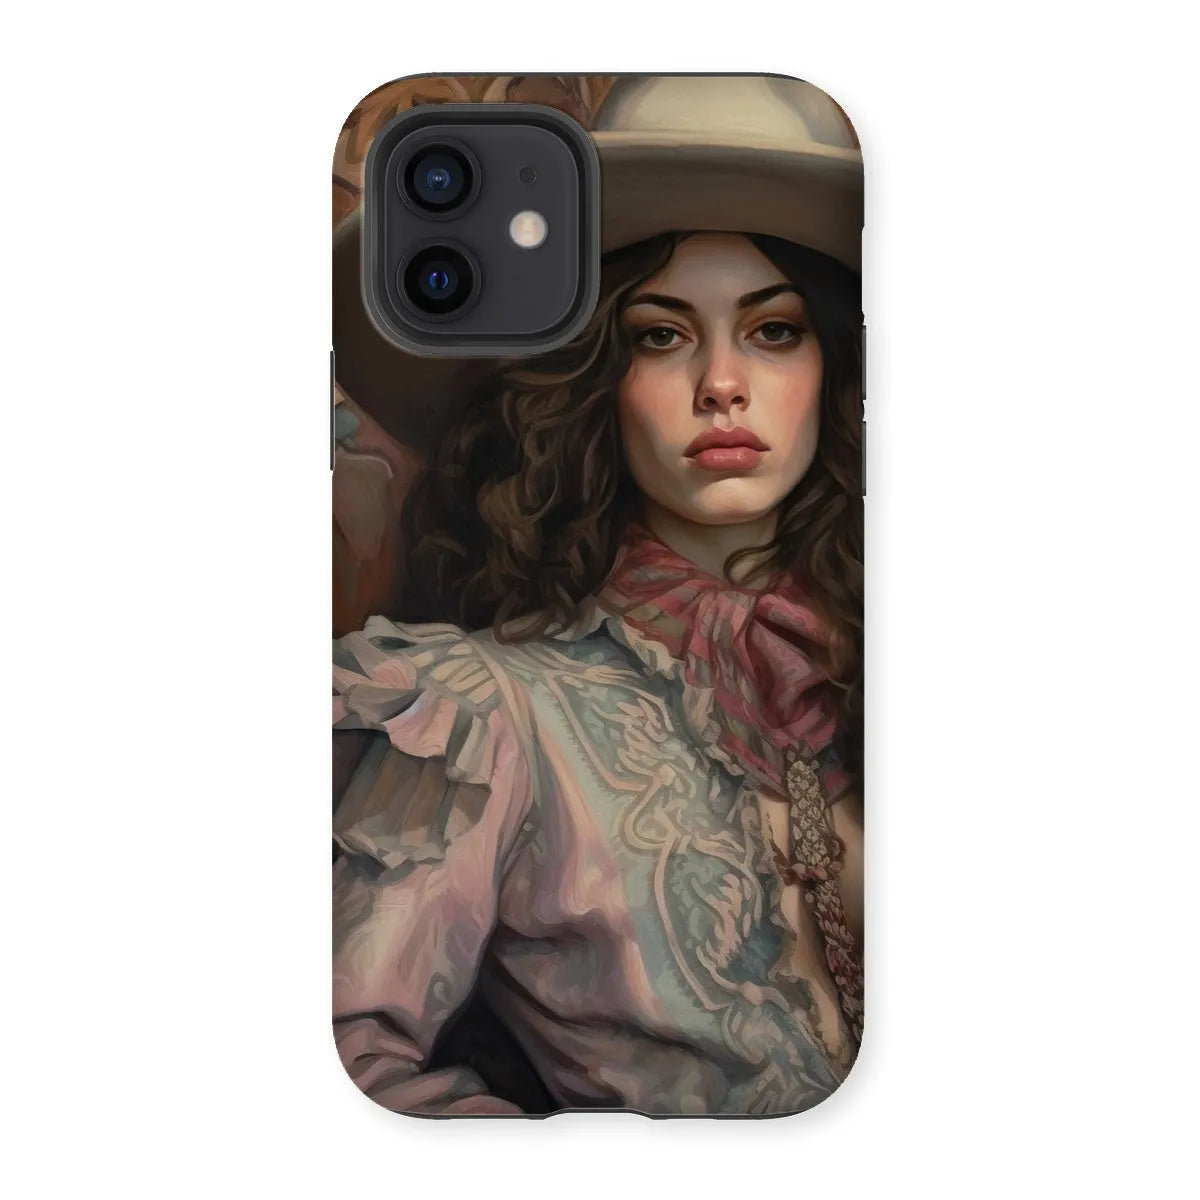 Alex The Lesbian Cowgirl - Sapphic Art Phone Case - Iphone 12 / Matte - Mobile Phone Cases - Aesthetic Art